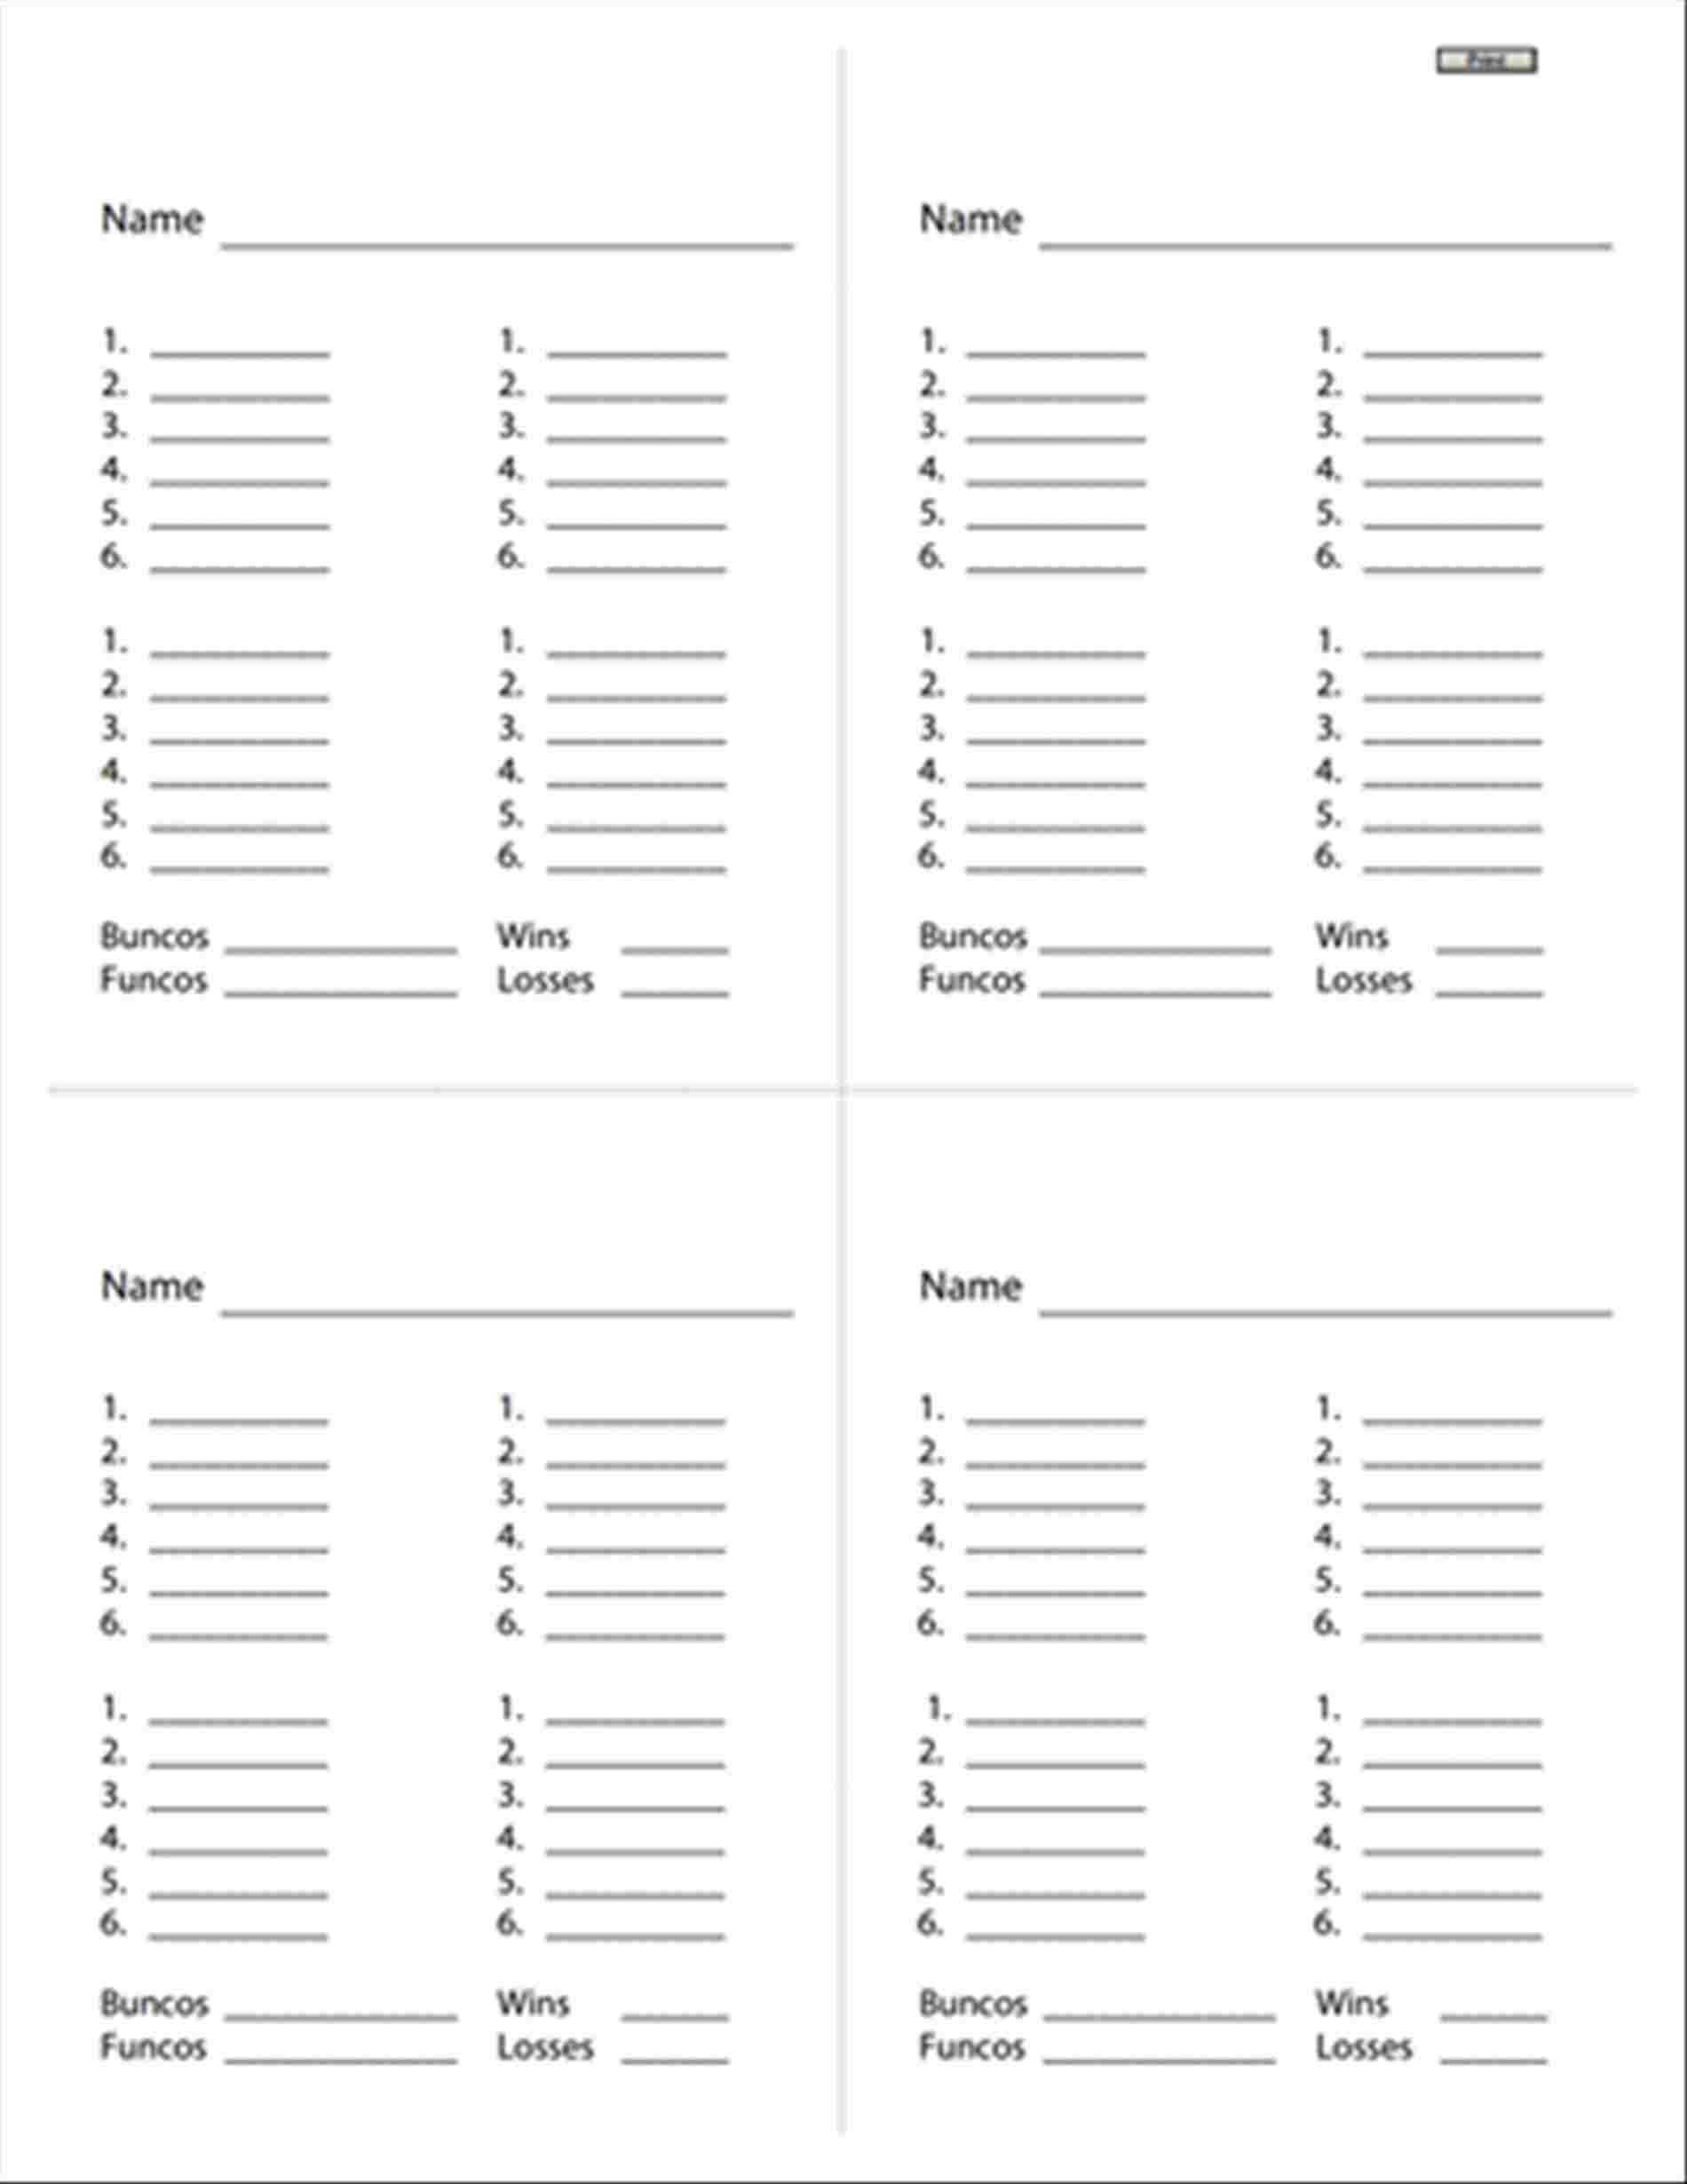 Free Printable Bunco Score Sheets (79+ Images In Collection) Page 1 - Printable Bunco Score Cards Free